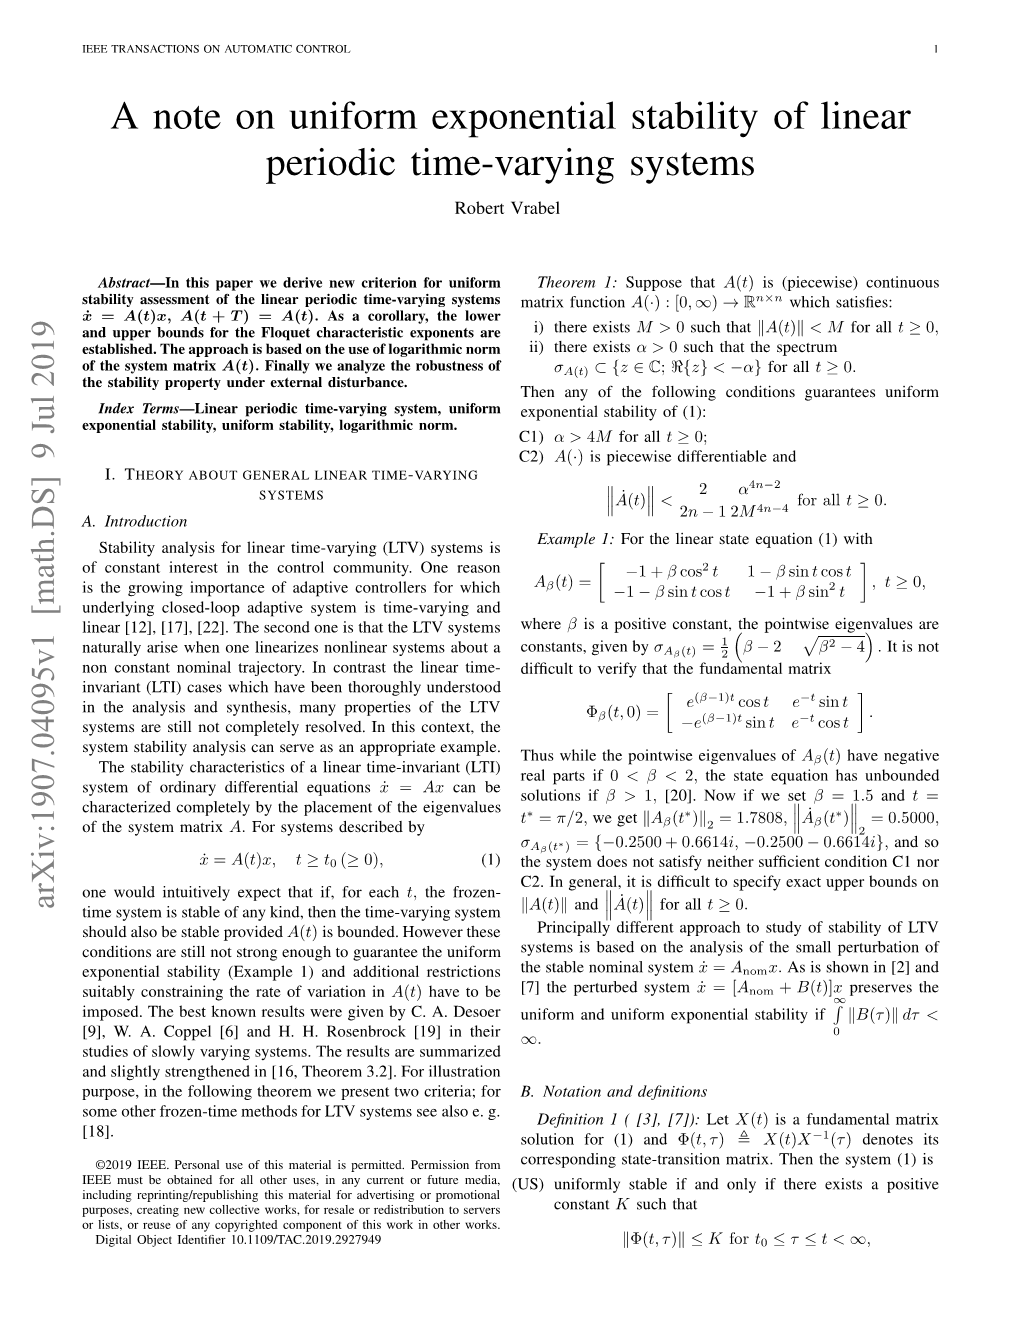 A Note on Uniform Exponential Stability of Linear Periodic Time-Varying Systems